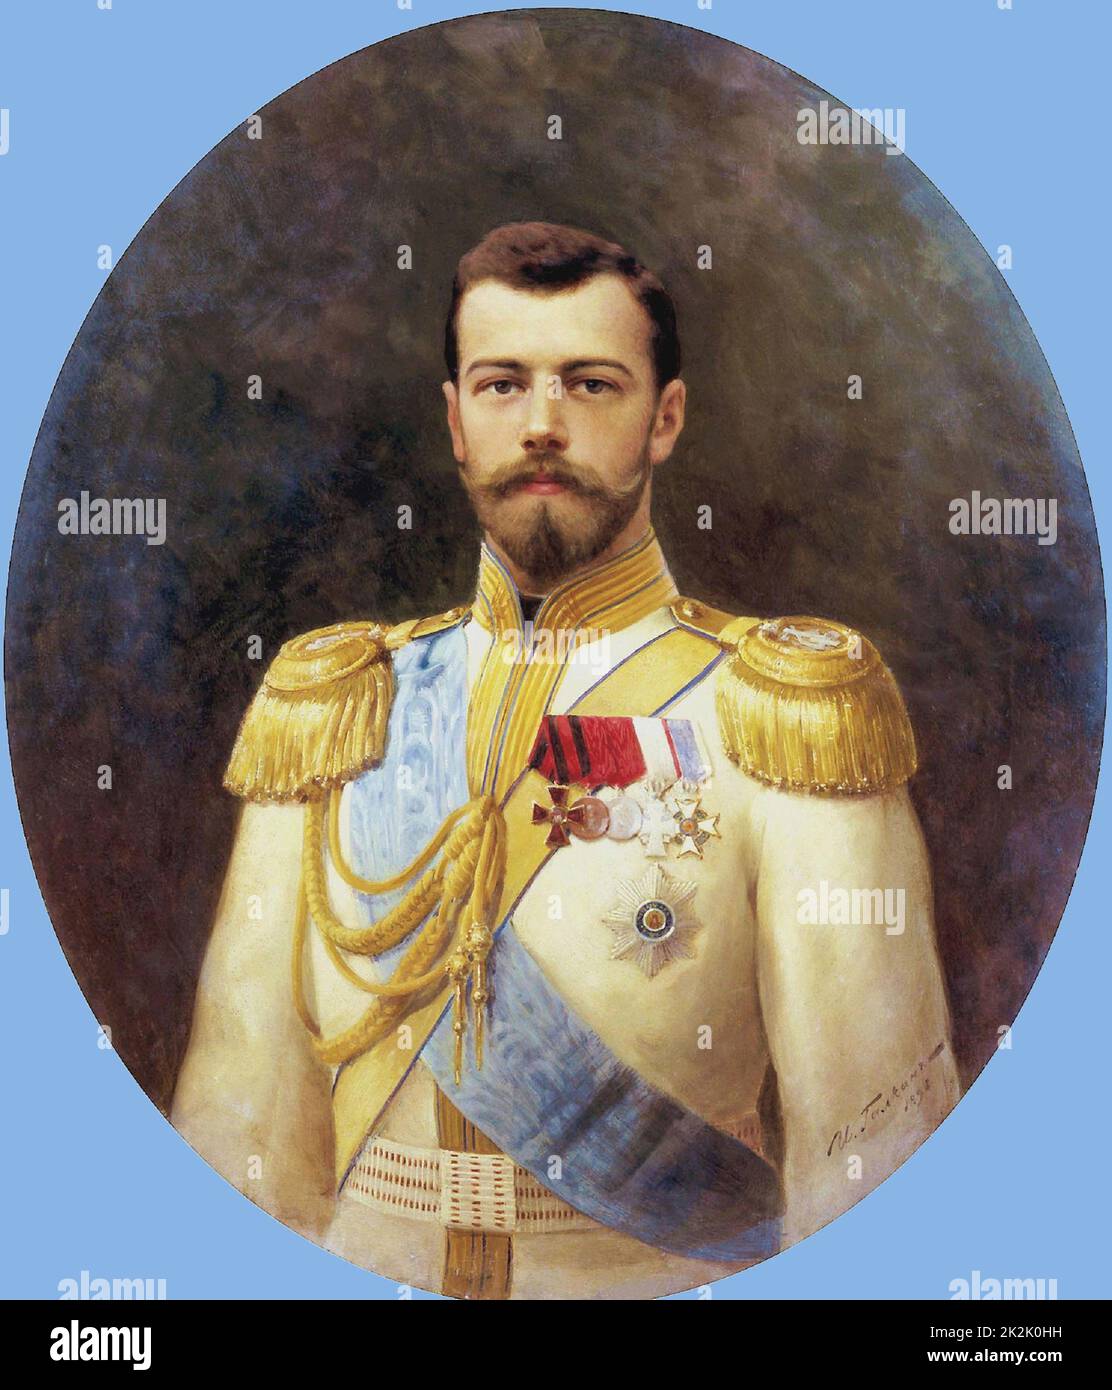 Nicholas II 1868 – 17 July 1918), last Tsar of Russia, ruled from 1894 until his abdication on 15 March 1917. Executed in July 1918. Portrait by Ilya Galkin 1898 Stock Photo